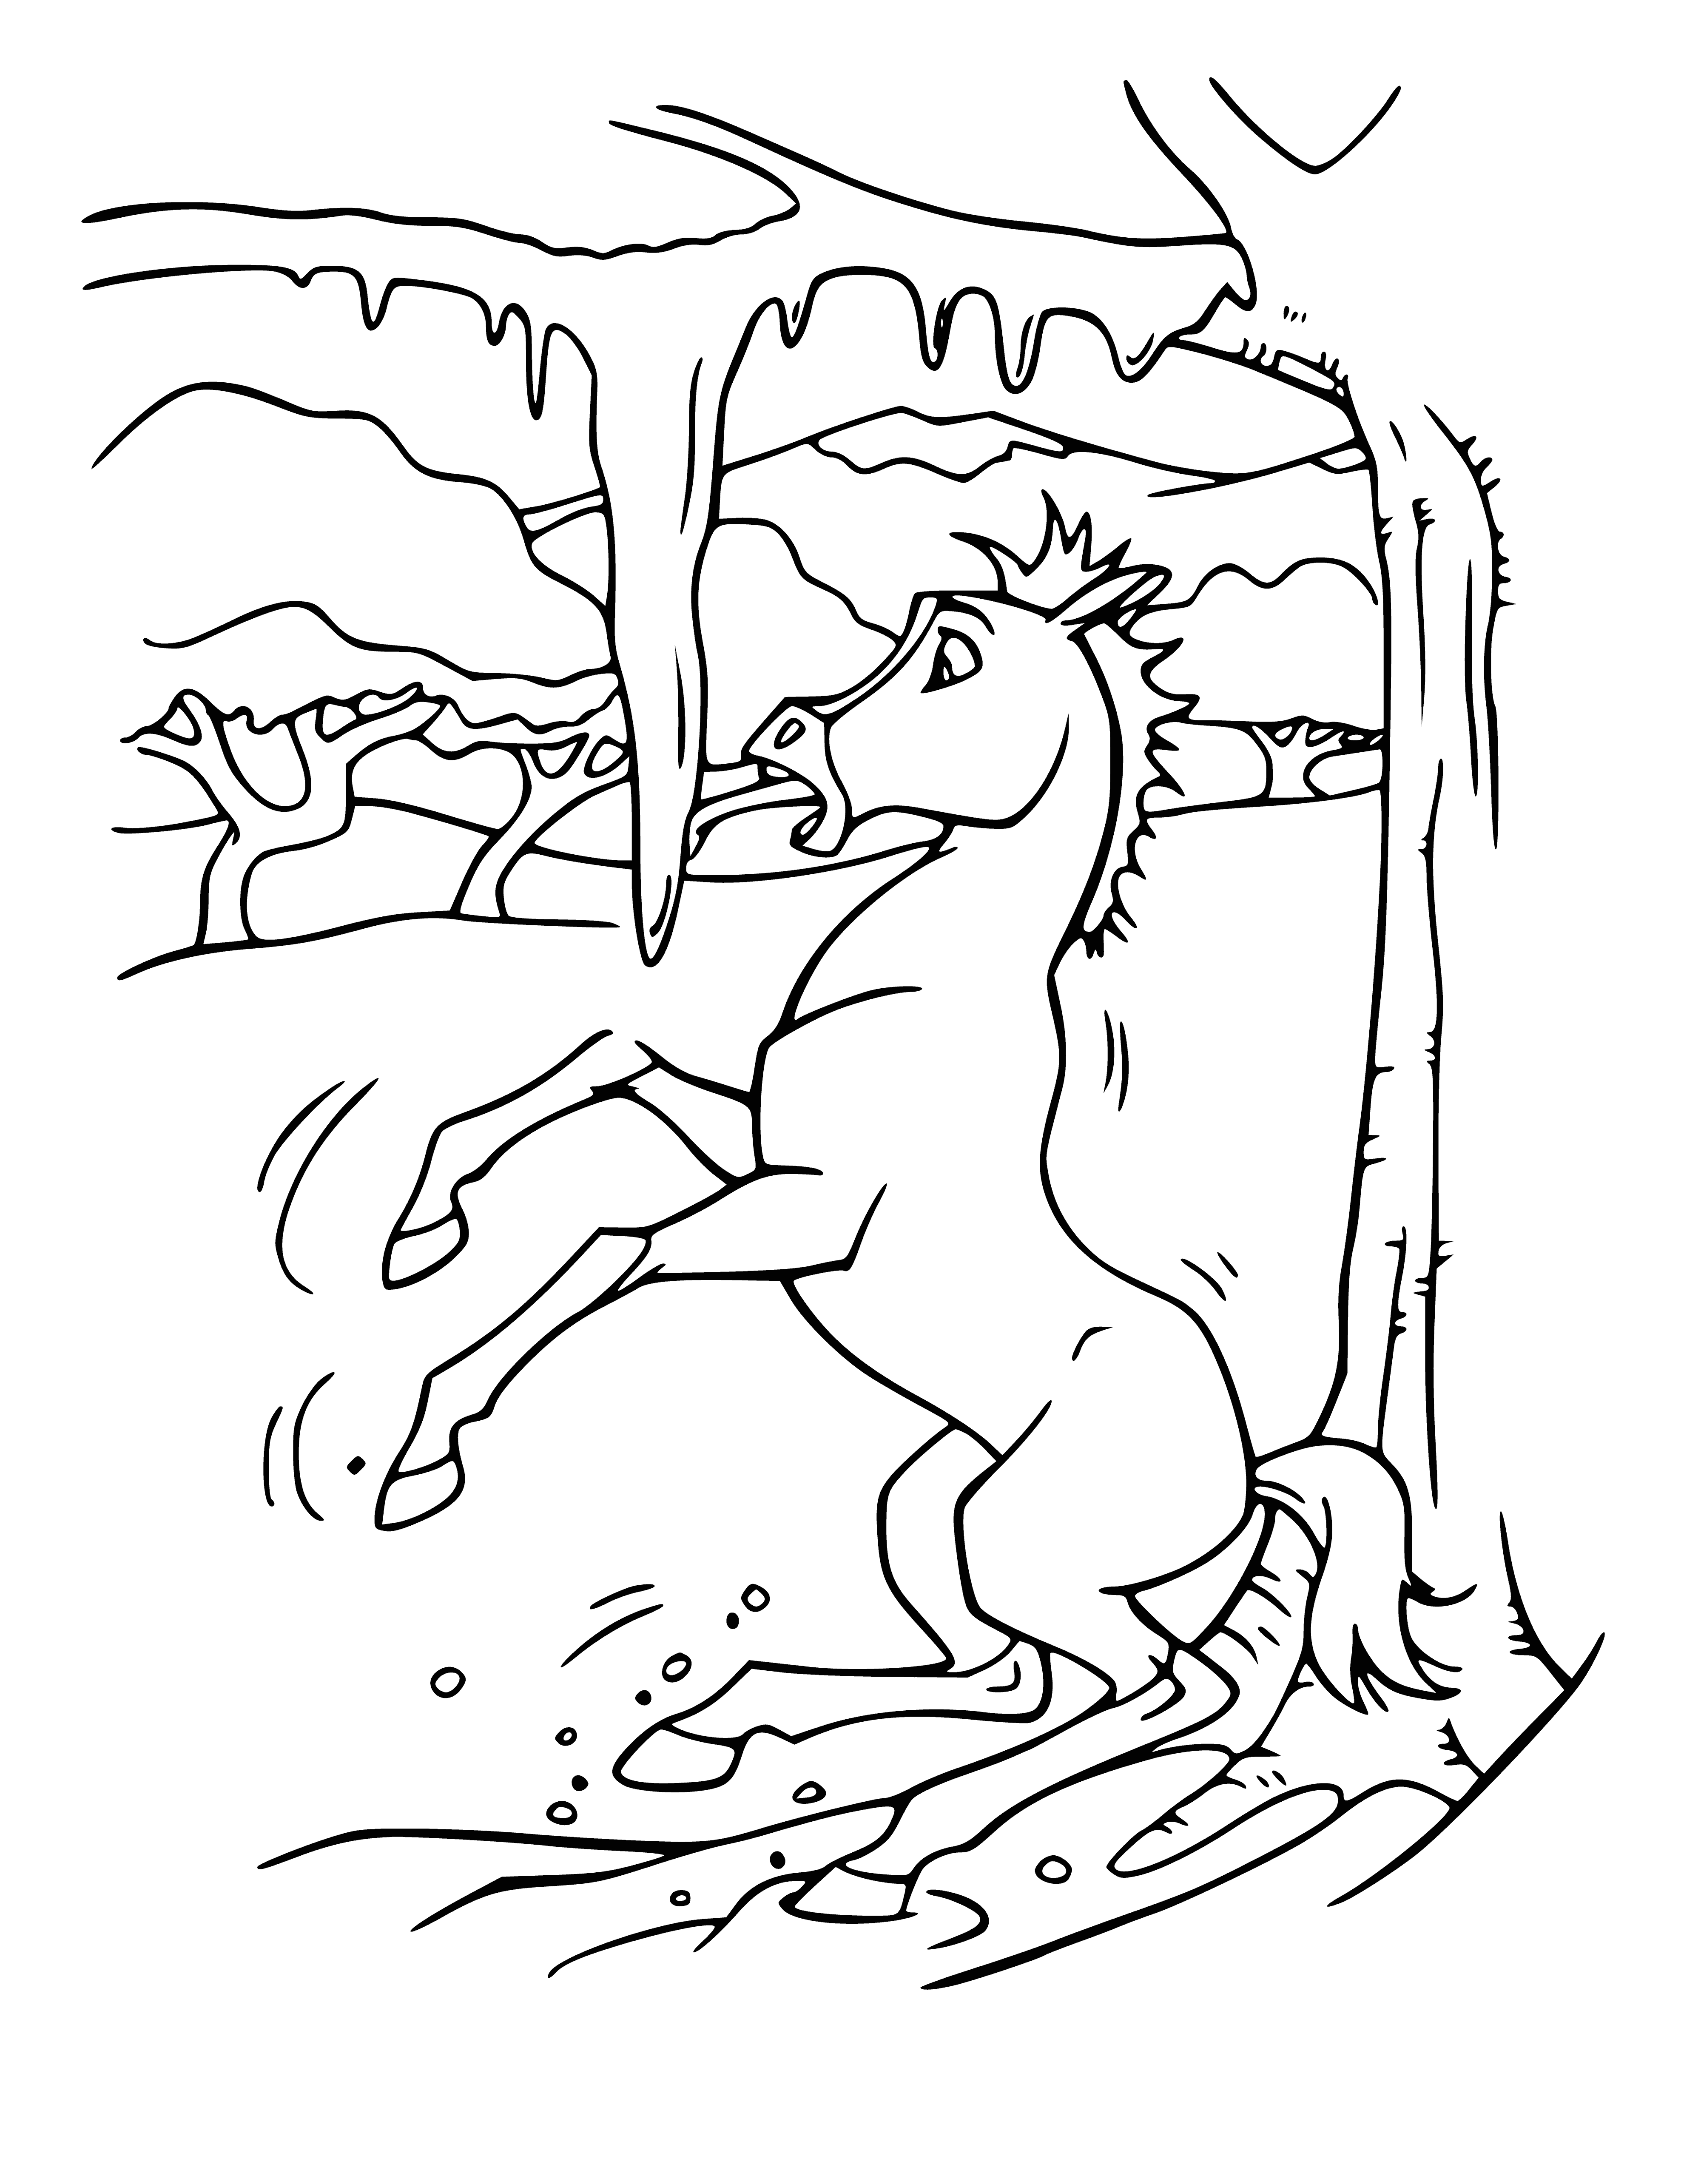 coloring page: Spirit stands in a field on his first winter, surrounded by trees, his coat shining in the sunlight while snow gently falls. He looks up at the sky.